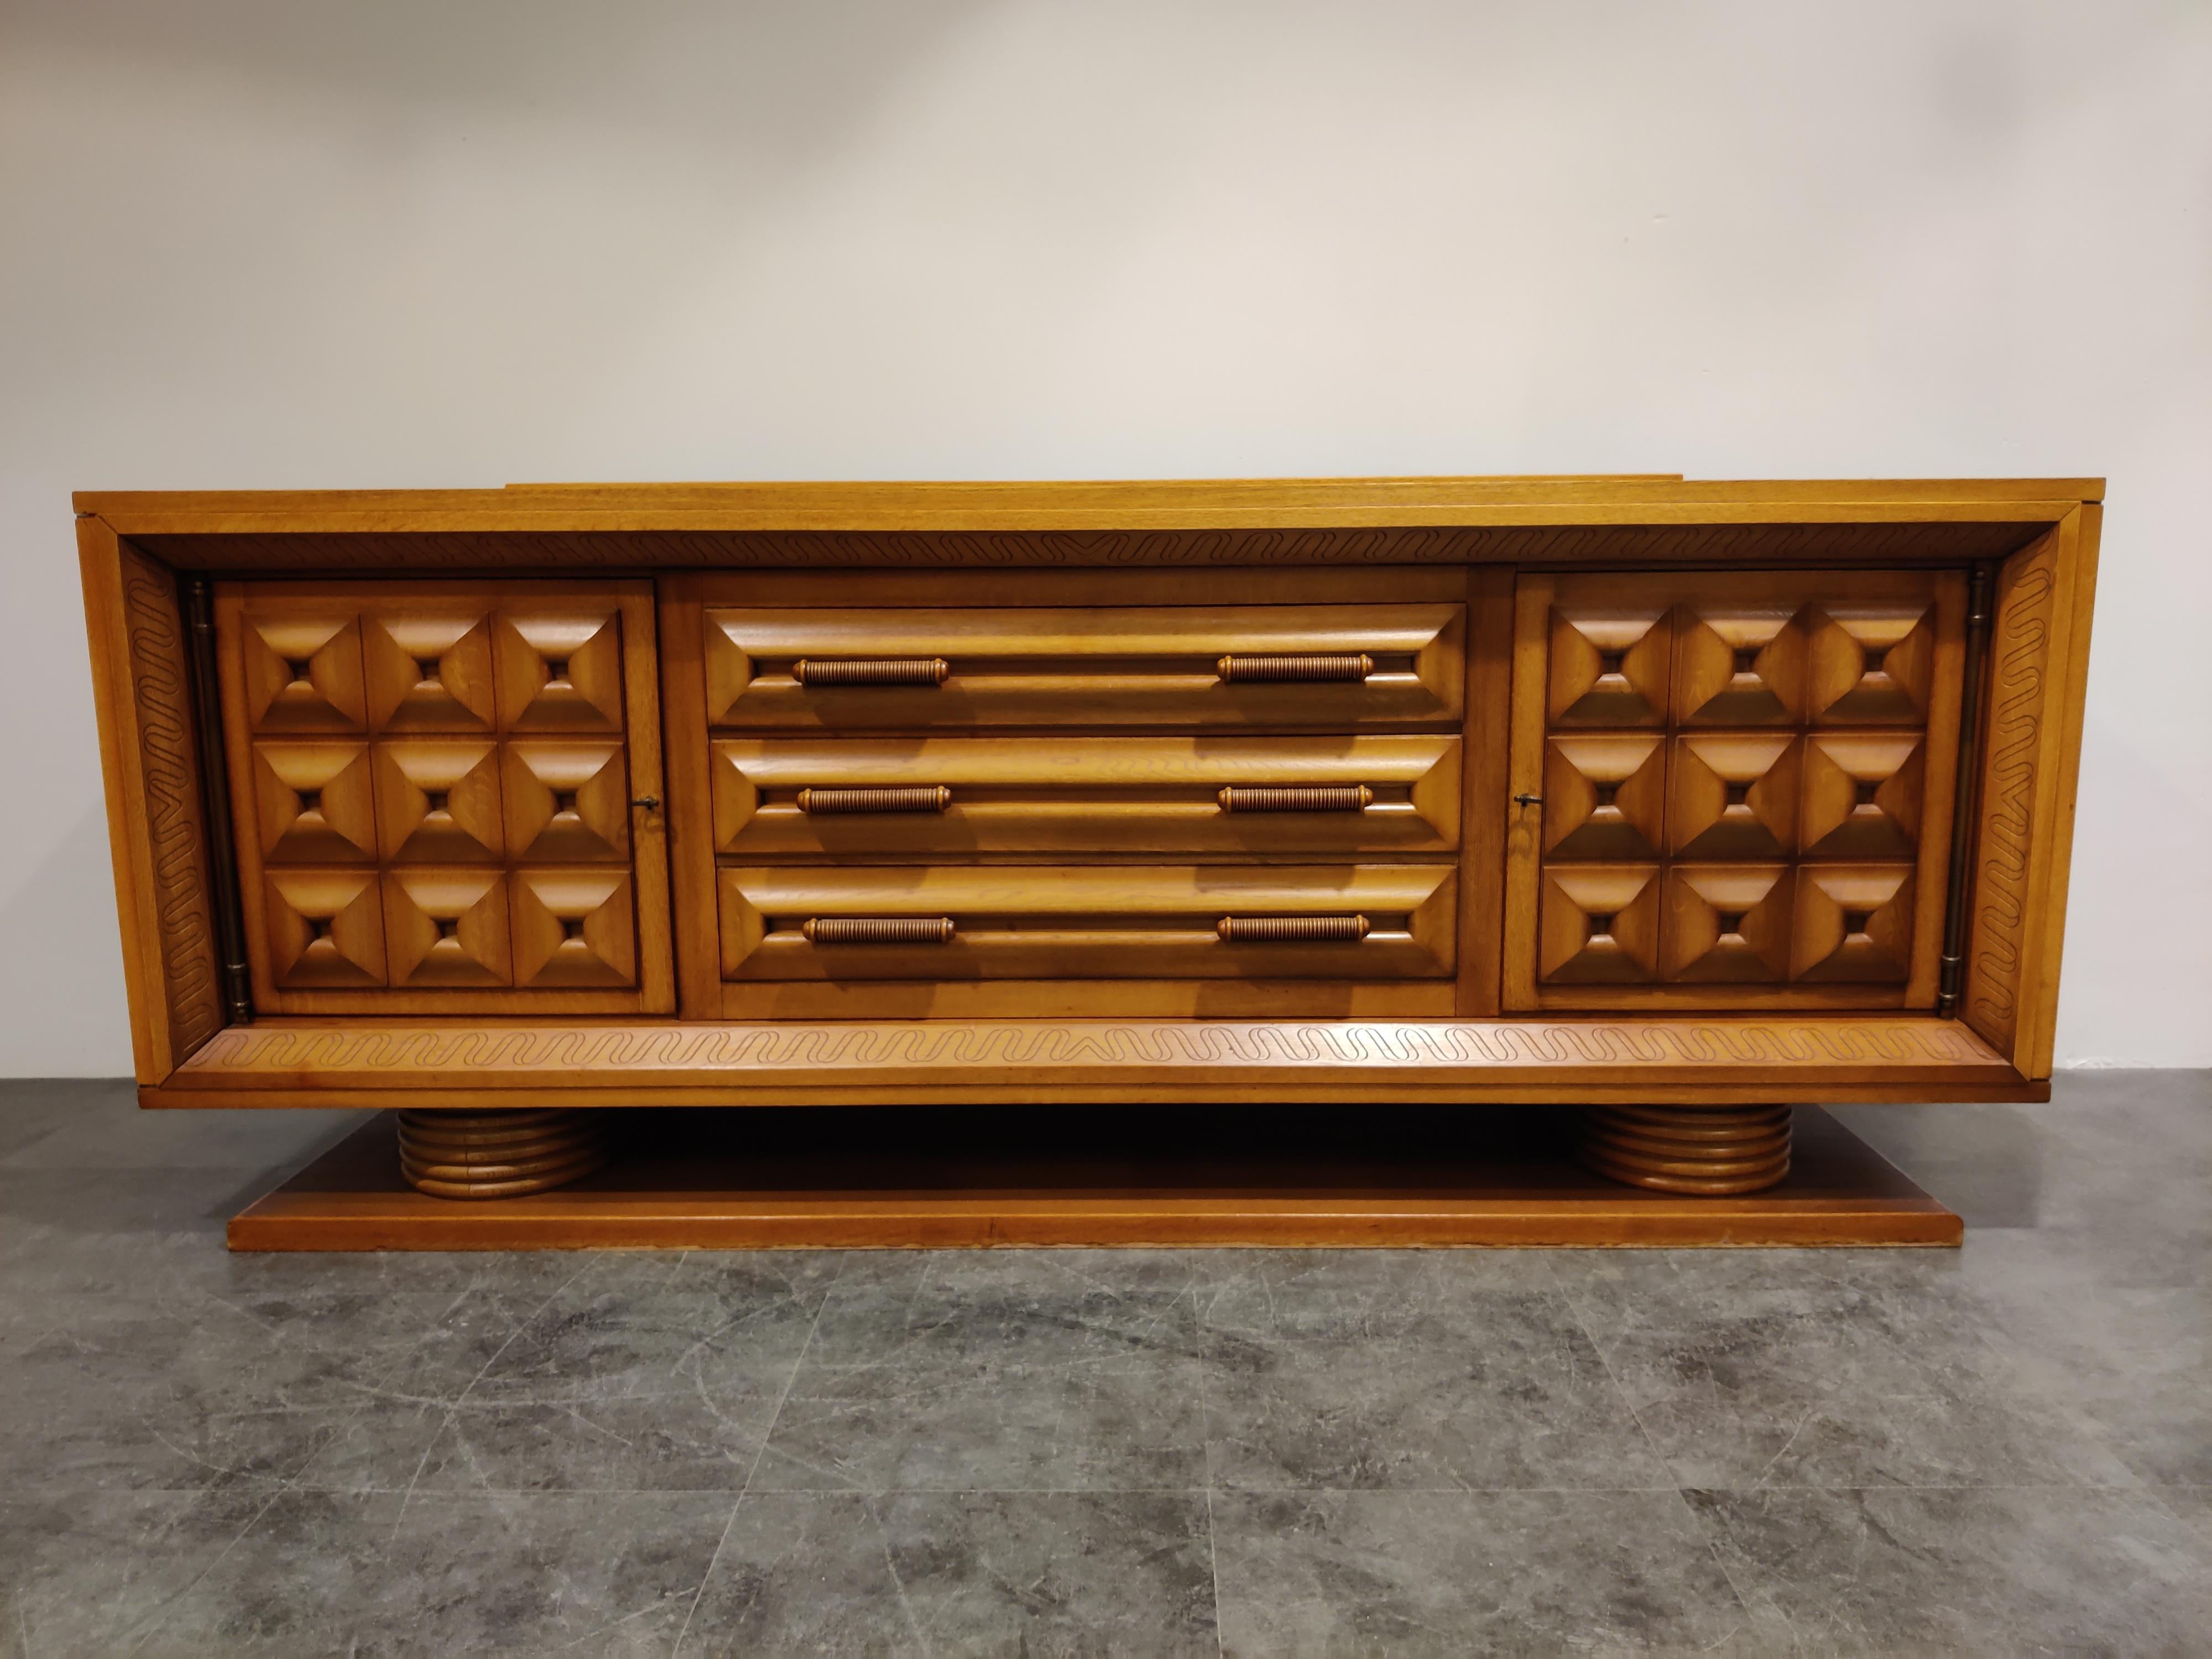 Exquisite Art Deco sideboard or credenza manufactured by French furniture maker Charles Dudouyt, one of the best first half of the 20th century French furniture makers.

For Brutalist design enthusiasts, this might just be perfect.

Spring like